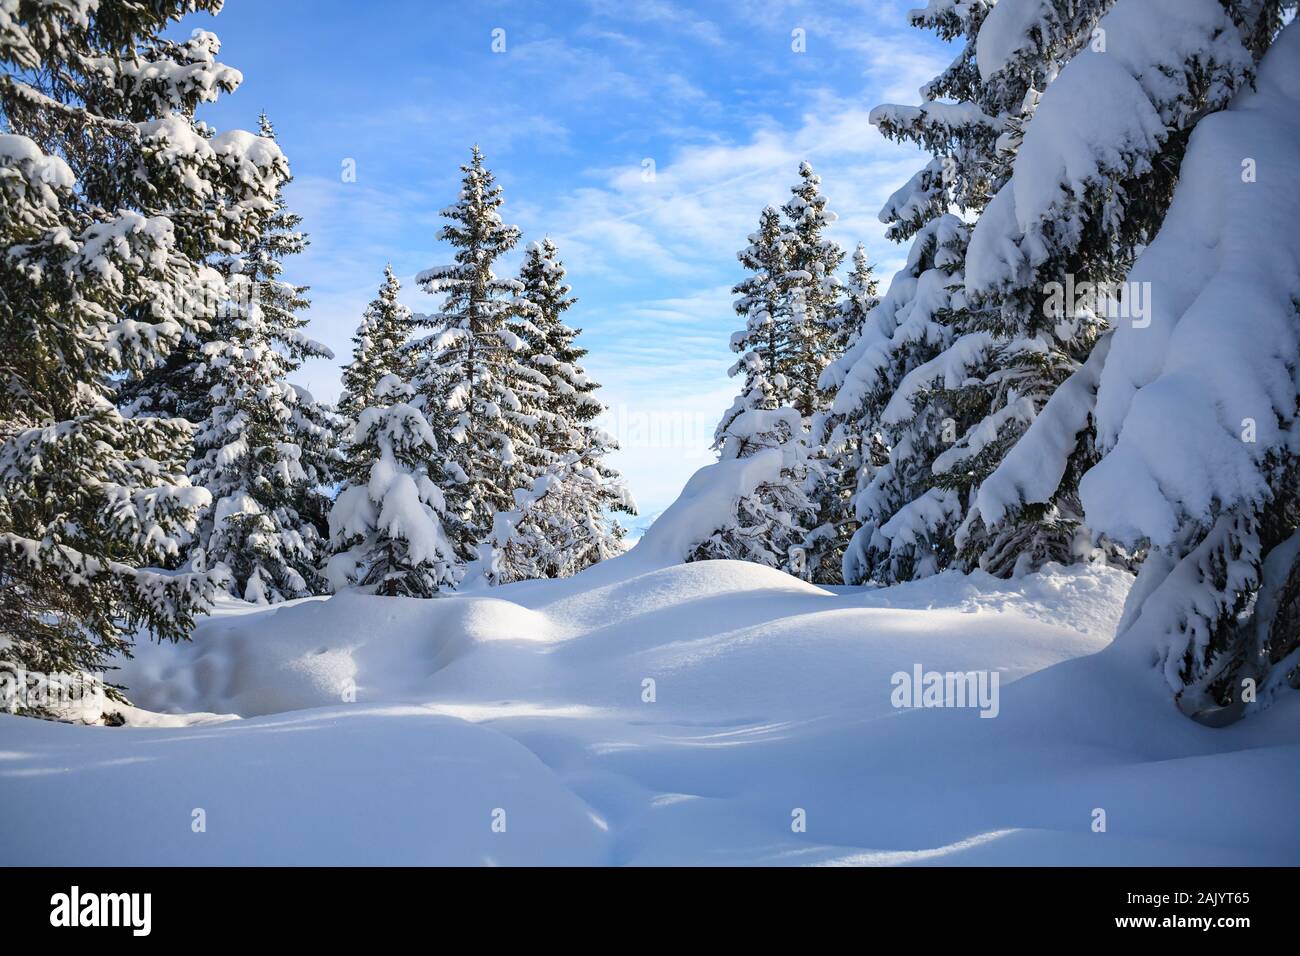 Wintry forest in the Alps near Kufstein in Austria, Europe. Stock Photo